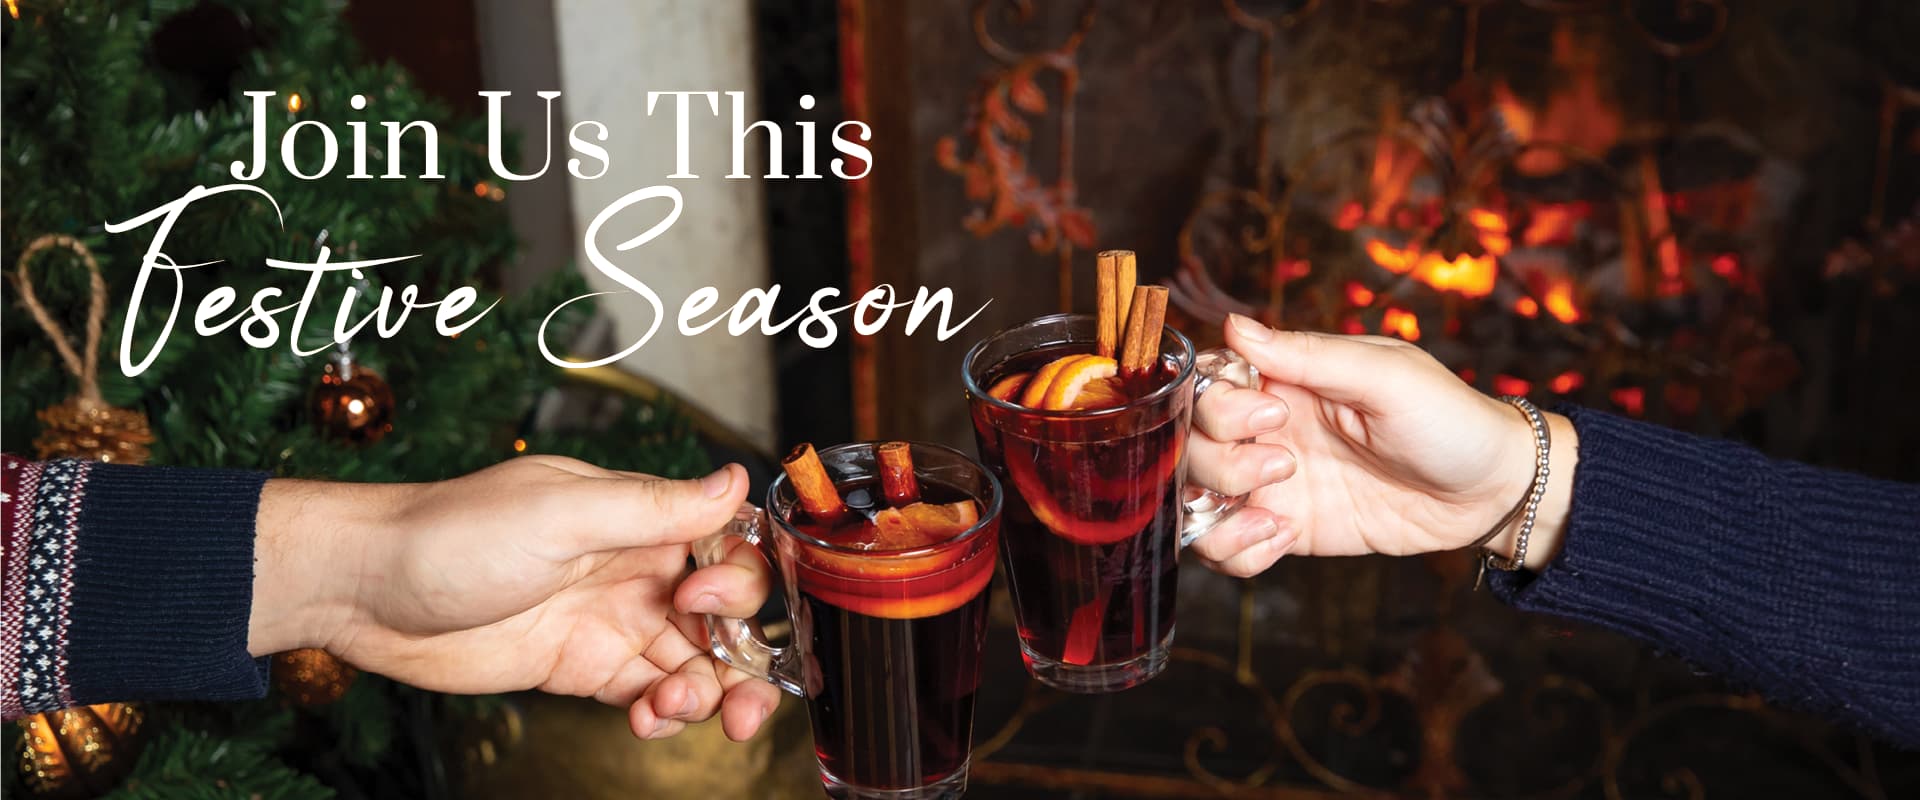 join us this festive season at The Pembroke | Mulled Wine